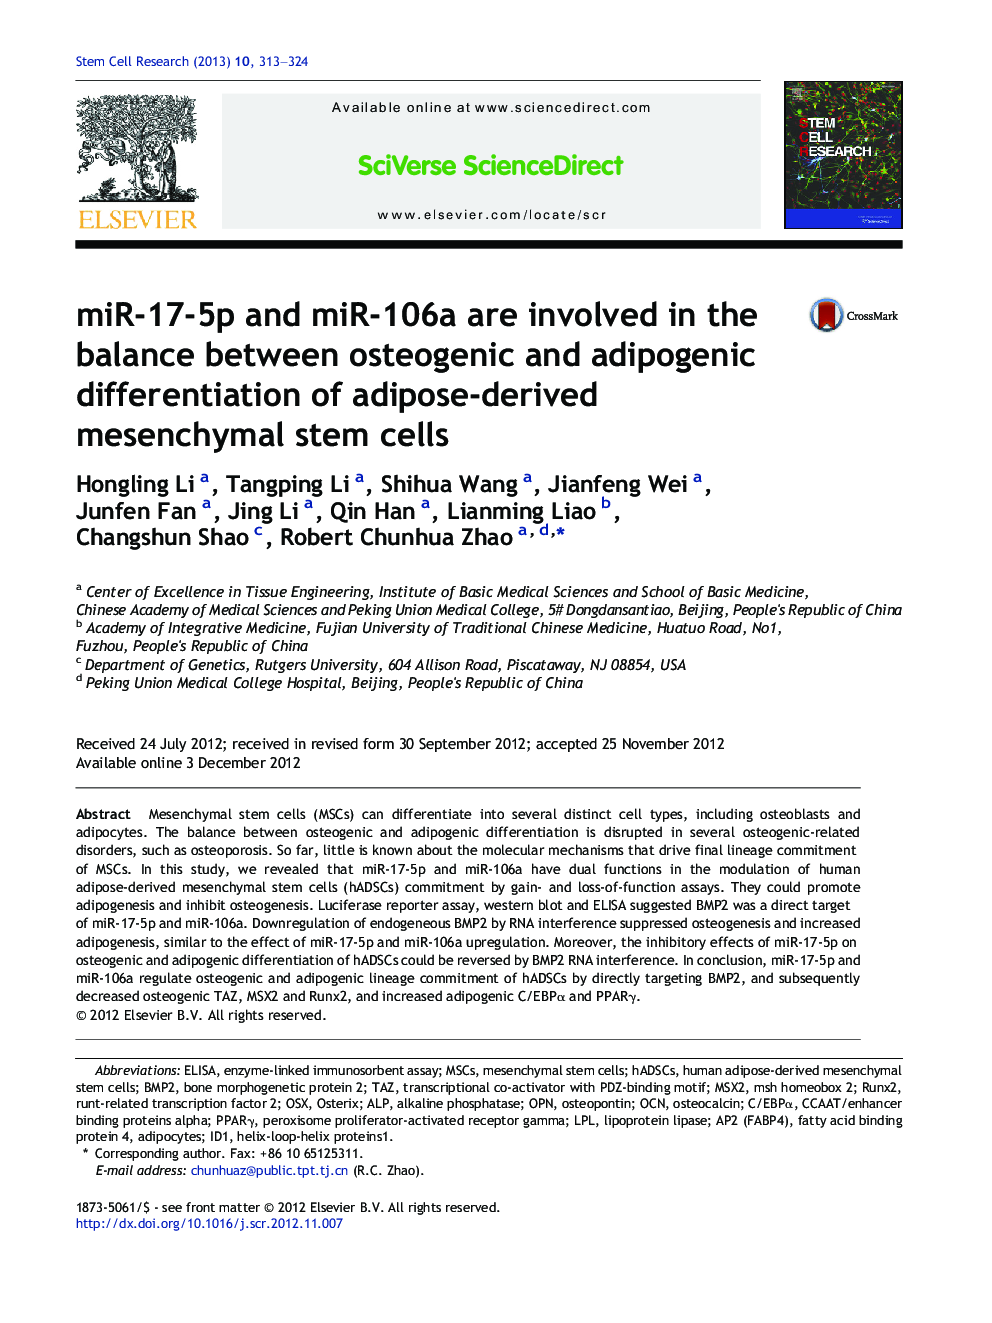 miR-17-5p and miR-106a are involved in the balance between osteogenic and adipogenic differentiation of adipose-derived mesenchymal stem cells